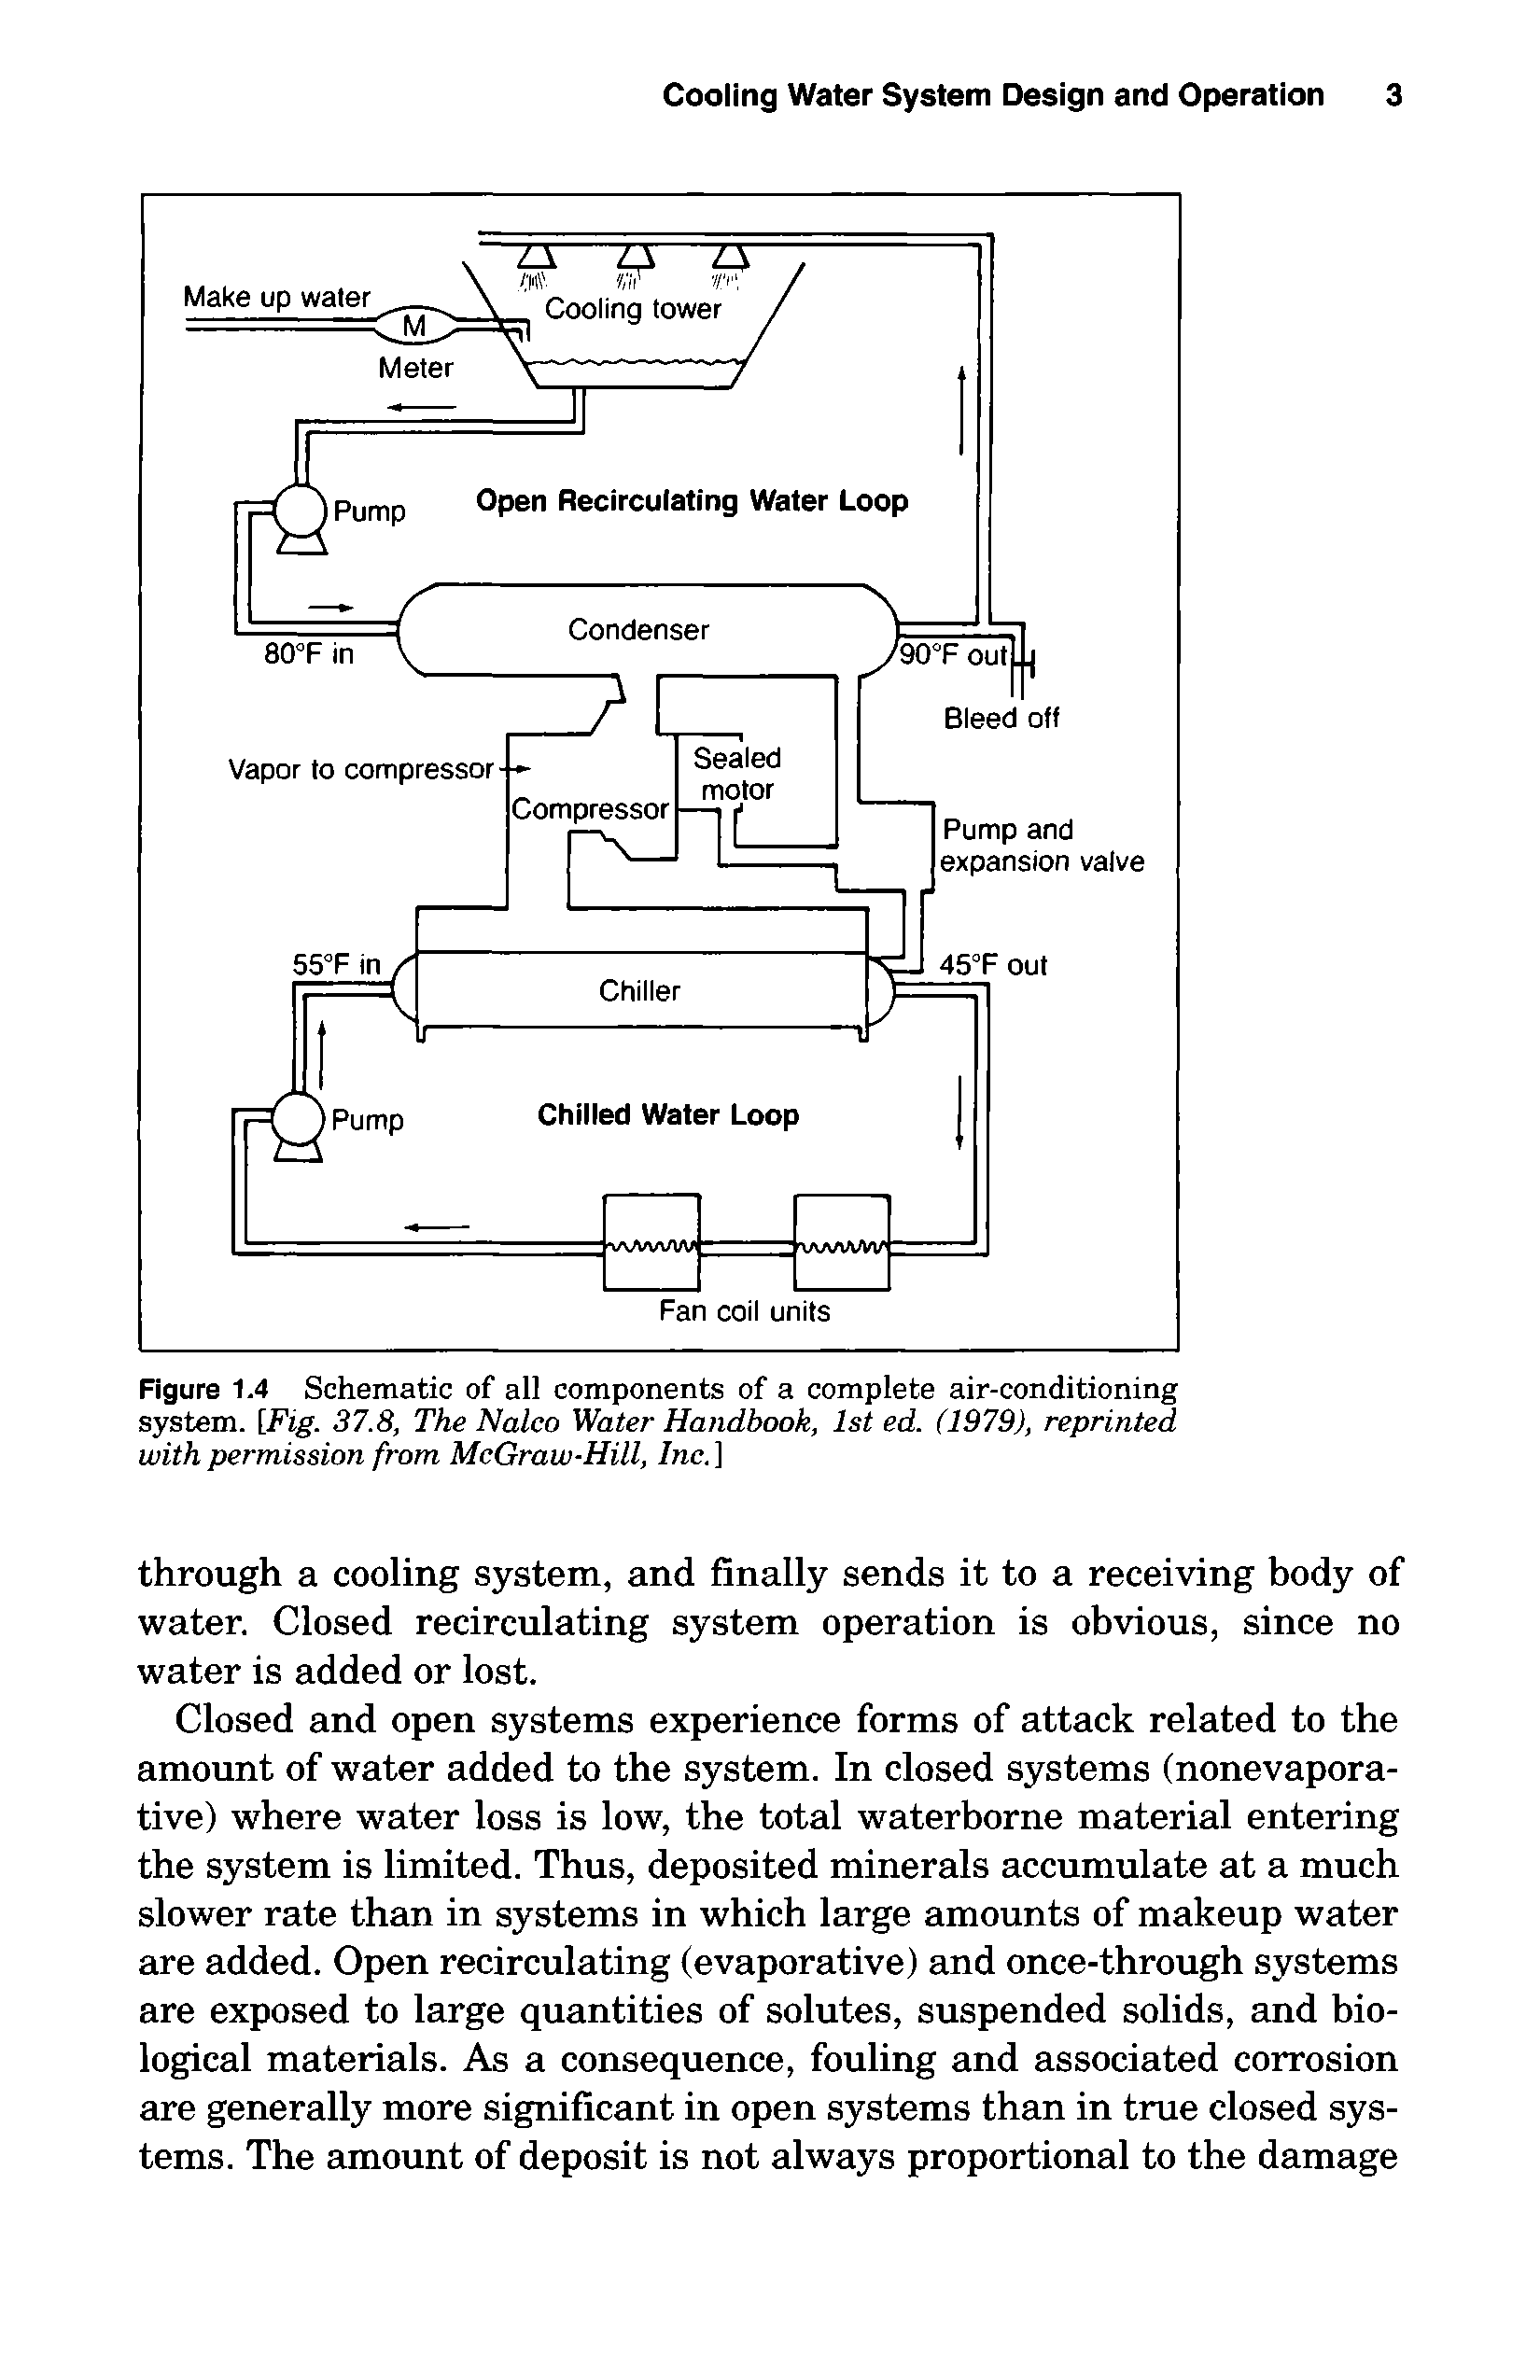 Figure 1.4 Schematic of all components of a complete air-conditioning system. [Fig. 37.8, The Nalco Water Handbook, 1st ed. (1979), reprinted with permission from McGraw-Hill, Inc. ]...